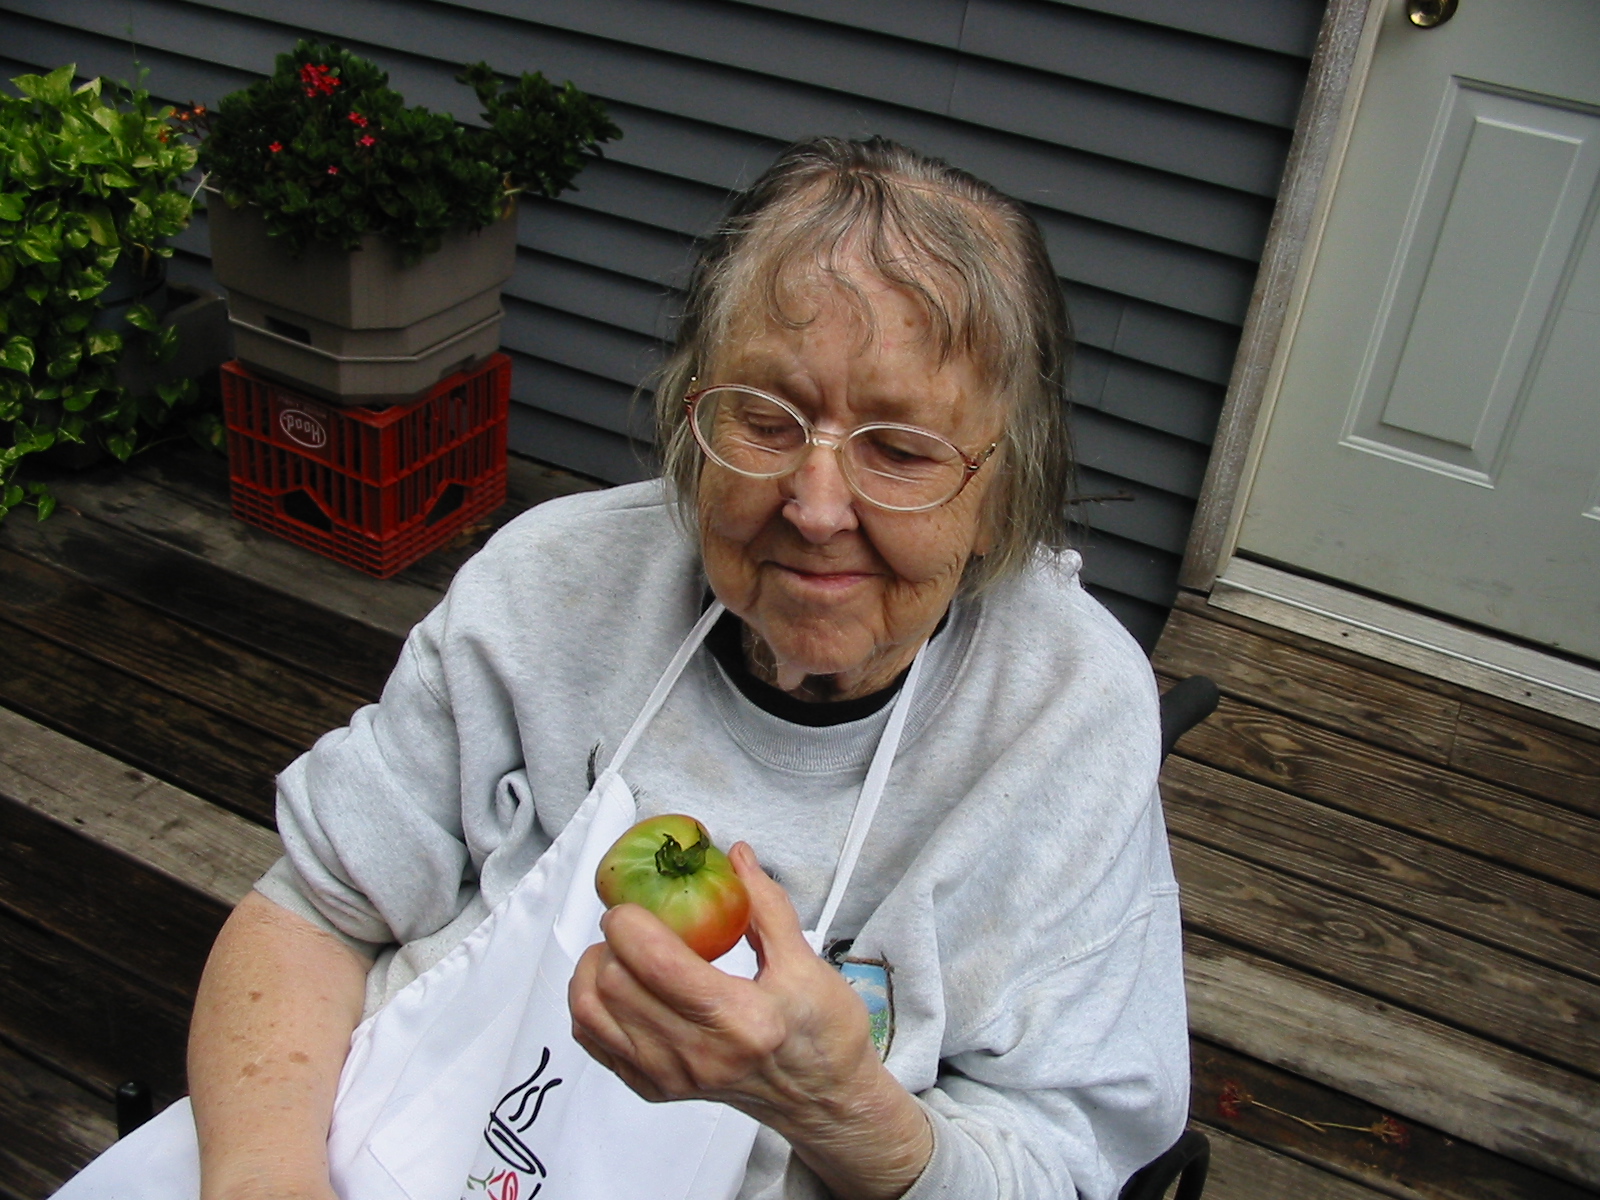 Yankee Woman &amp; Her Tomato (user submitted)